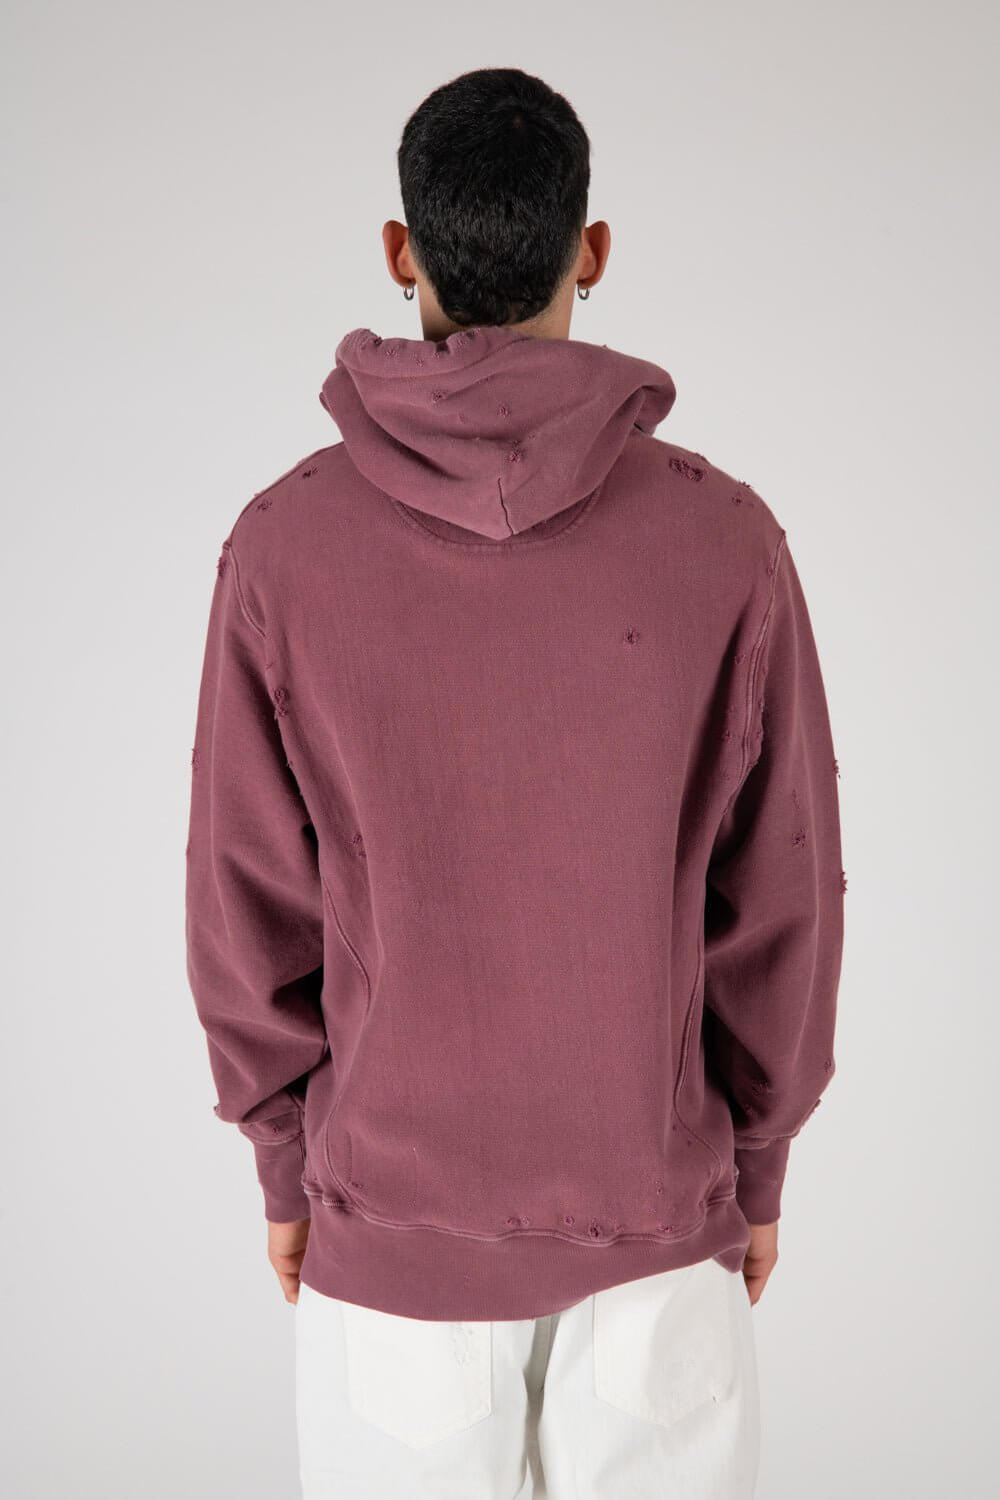 MY HOOD - AKA7 HTC 7 print distressed hoodie. Hood with drawstring, ribbed cuffs and hem. One front kangaroo pocket. Intentionally distressed areas may vary. Composition: 100% Cotton HTC LOS ANGELES